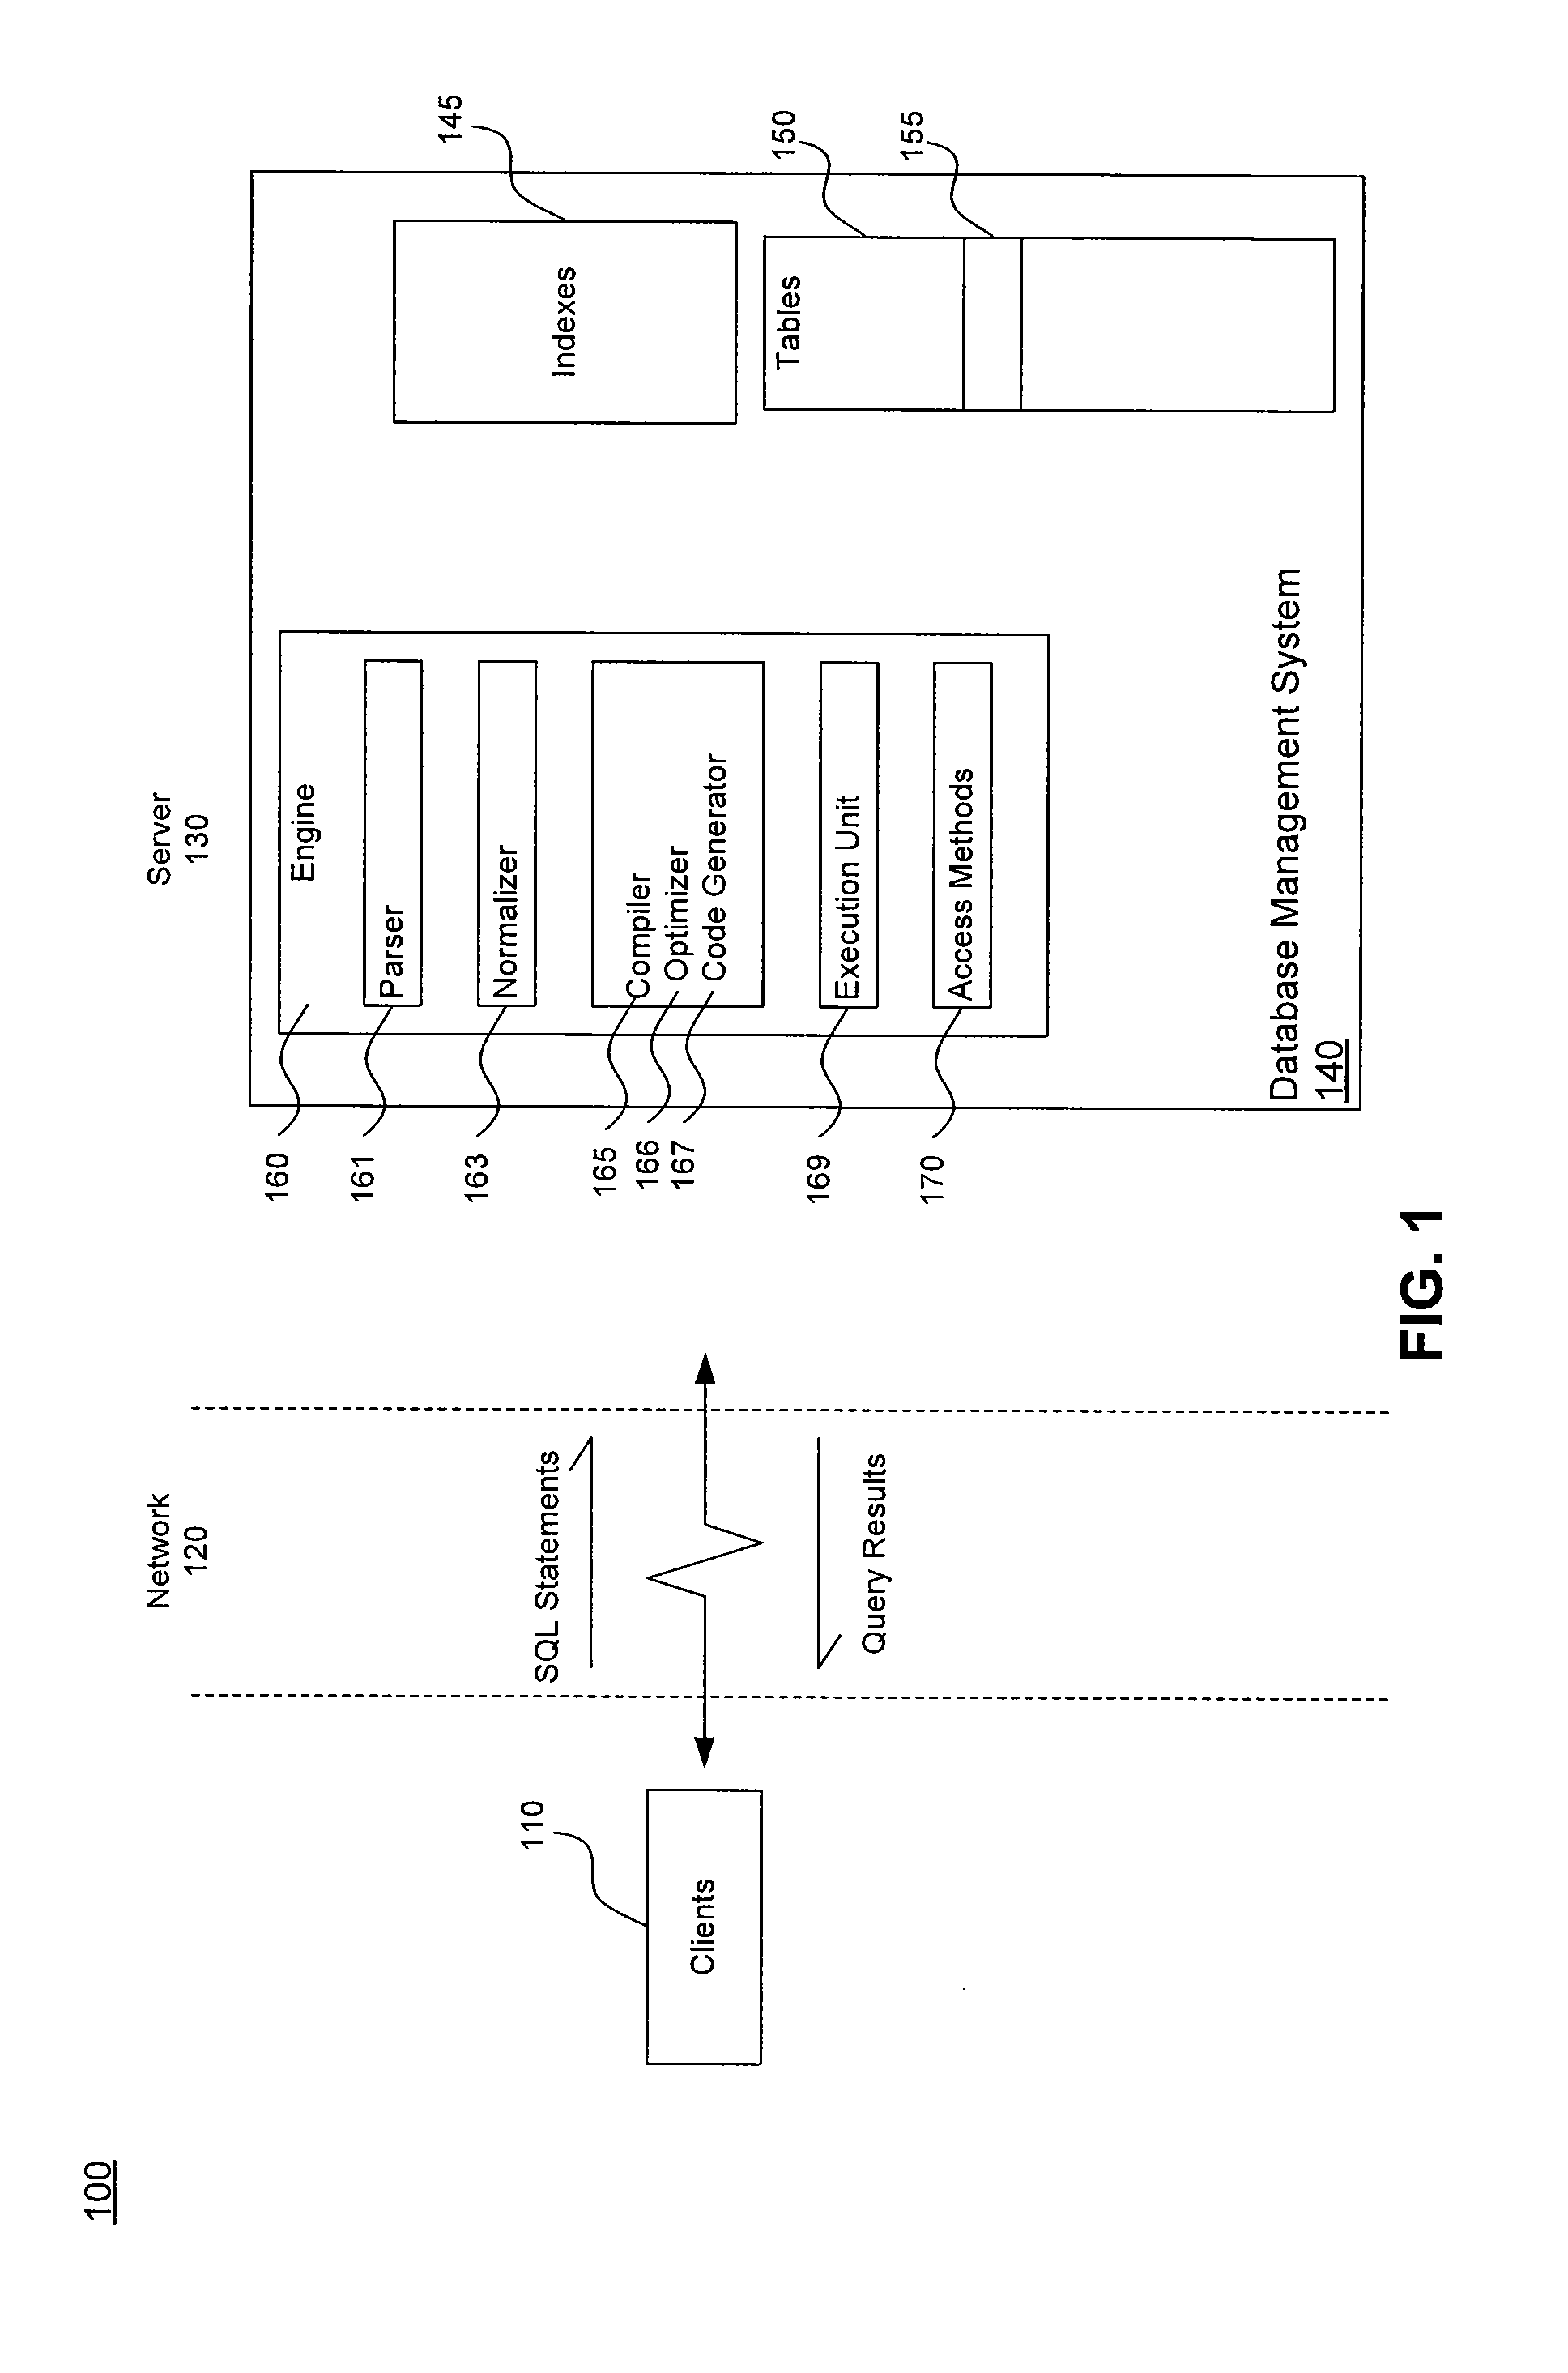 Protection of encryption keys in a database